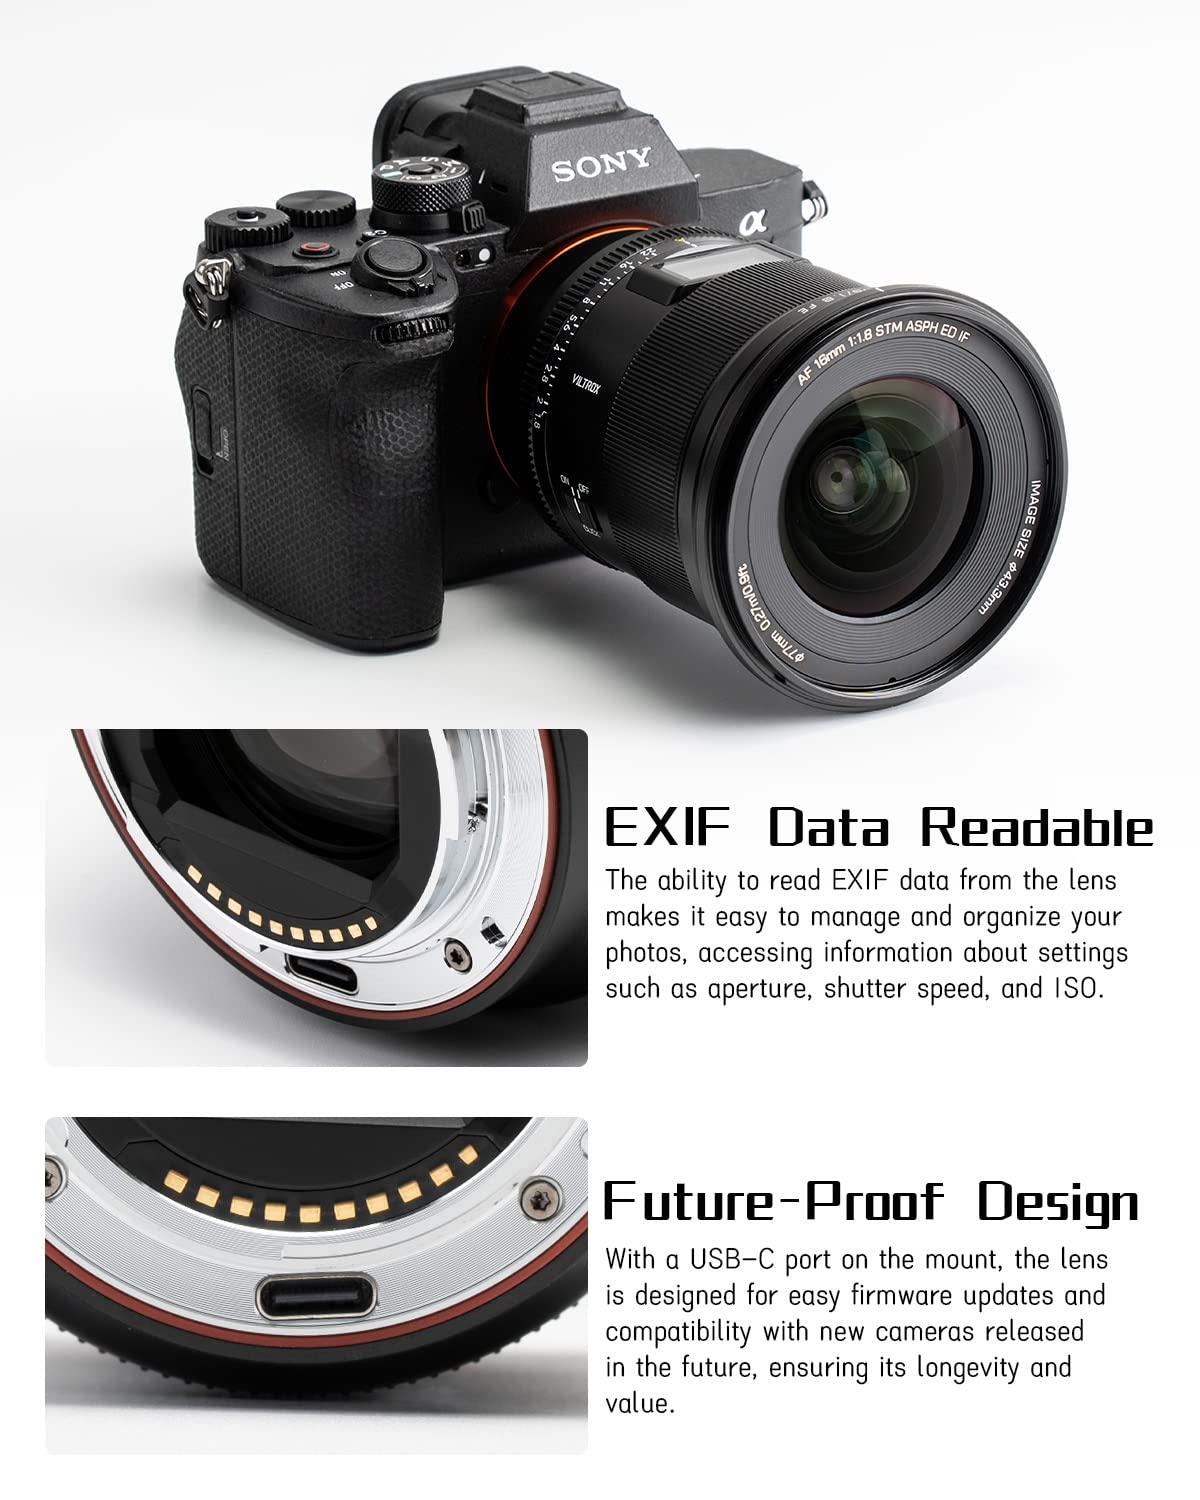 Viltrox AF 16mm F1.8 FE Full Frame Wide Angle Auto Focus Lens for Sony  E-mount